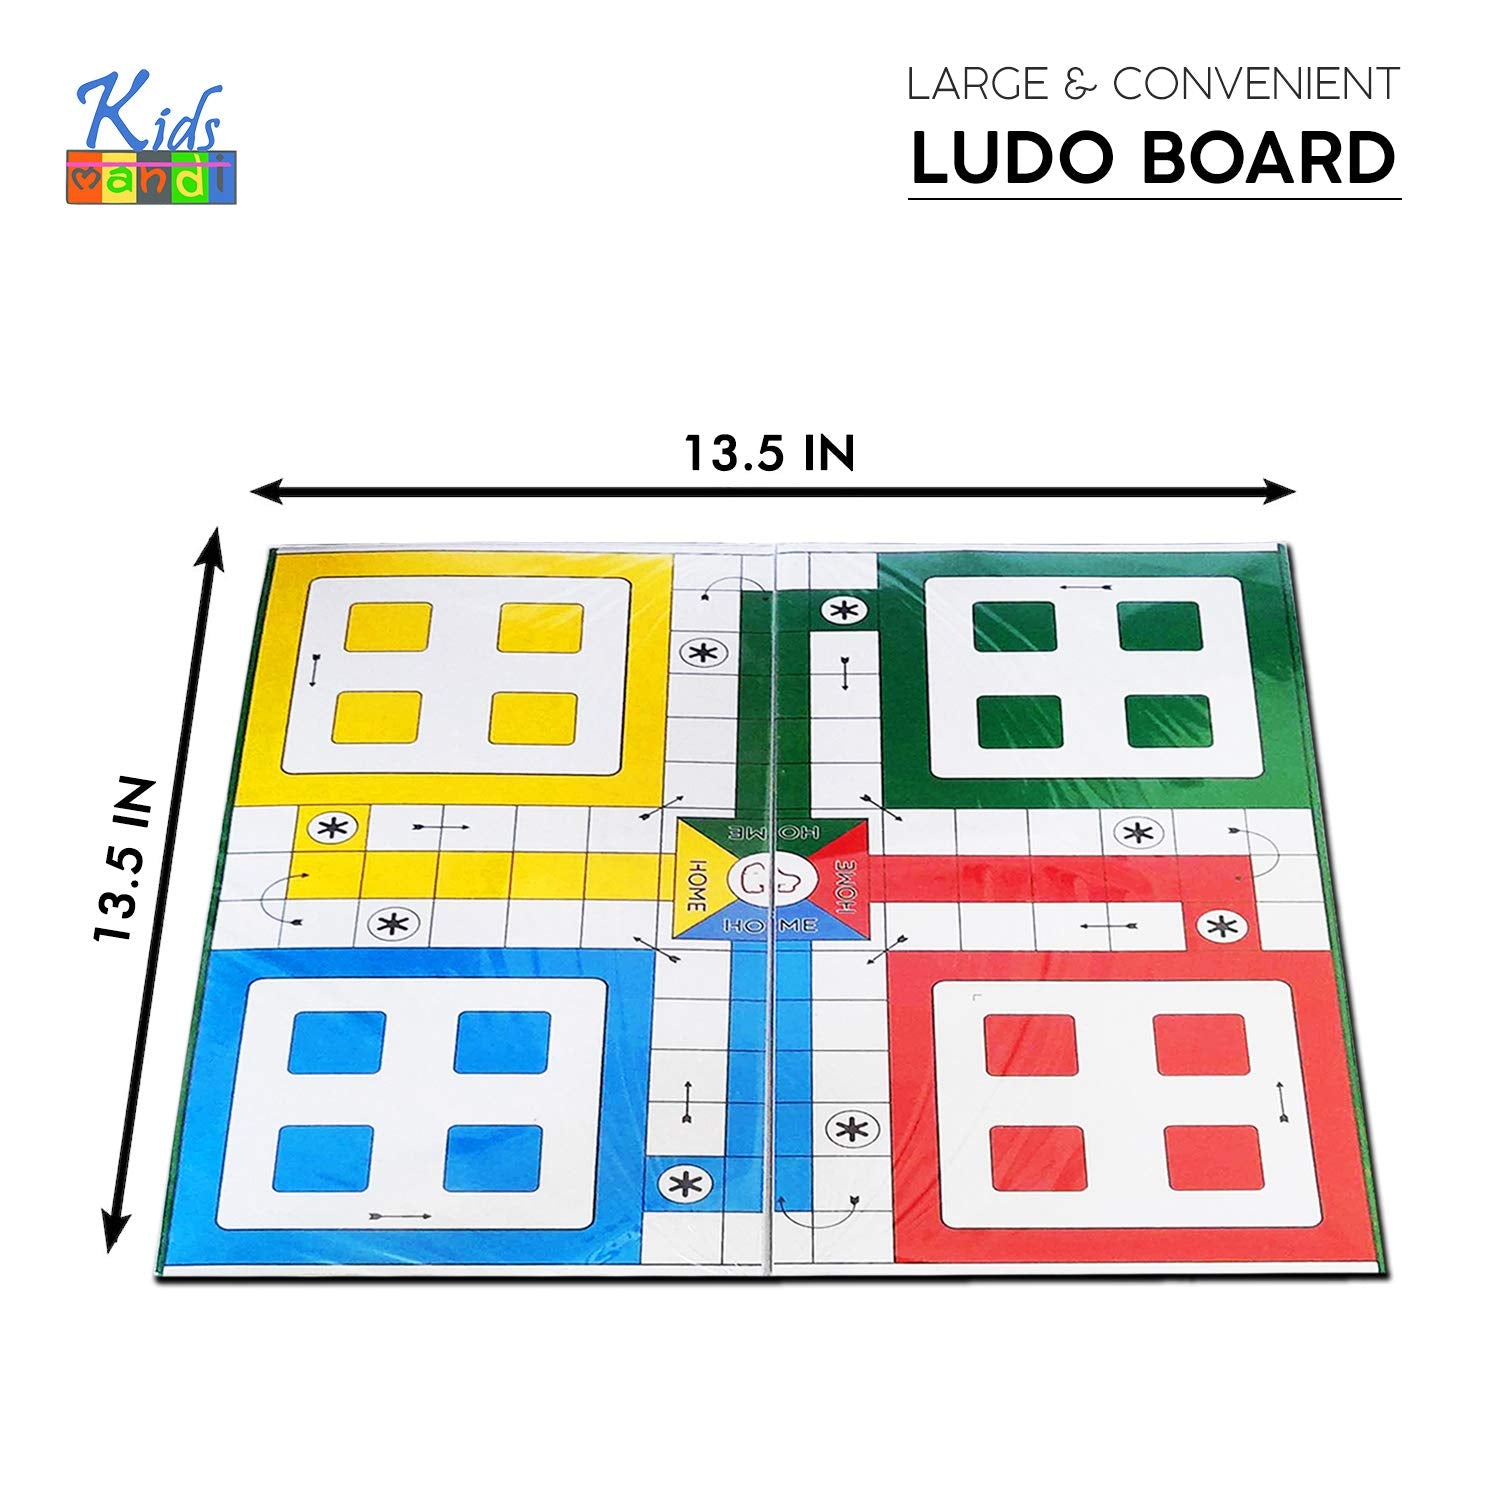 Kids Mandi Ludo Snakes Ladders Board Game Family Entertainer 4+ Years